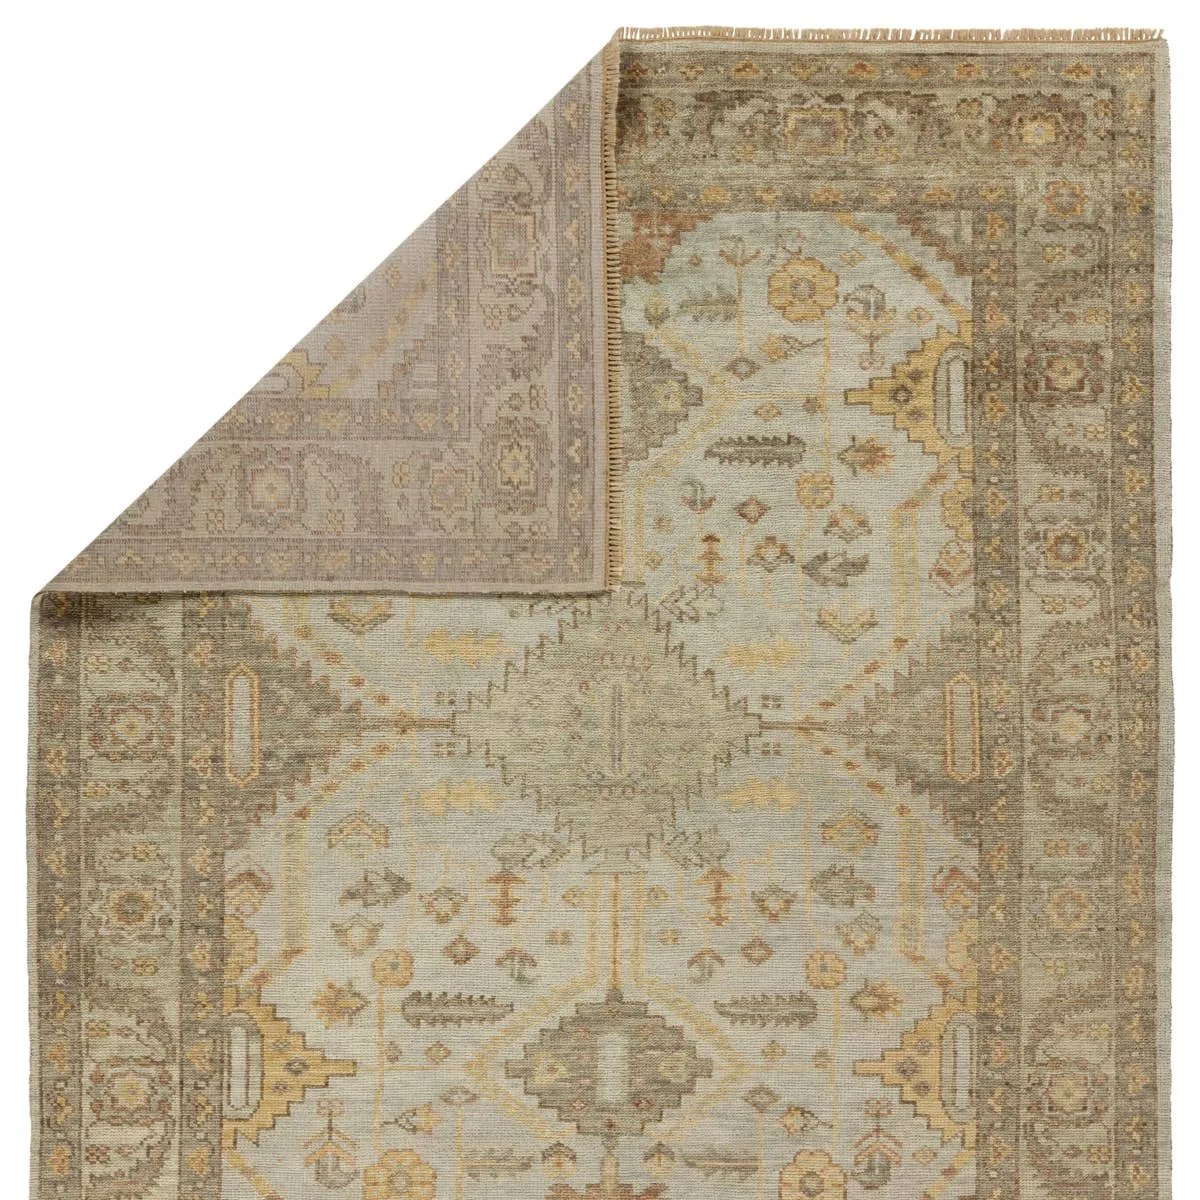 The Rhapsody Gehenna features heirloom-quality designs of stunningly abrashed Old World patterns. The Gehenna area rug boasts a beautifully distressed medallion motif with a decorative border and floral detailing. The gray and brown tones are accented with light blue, sage, beige, and yellow hues for added depth and intrigue. Amethyst Home provides interior design, new home construction design consulting, vintage area rugs, and lighting in the Washington metro area.